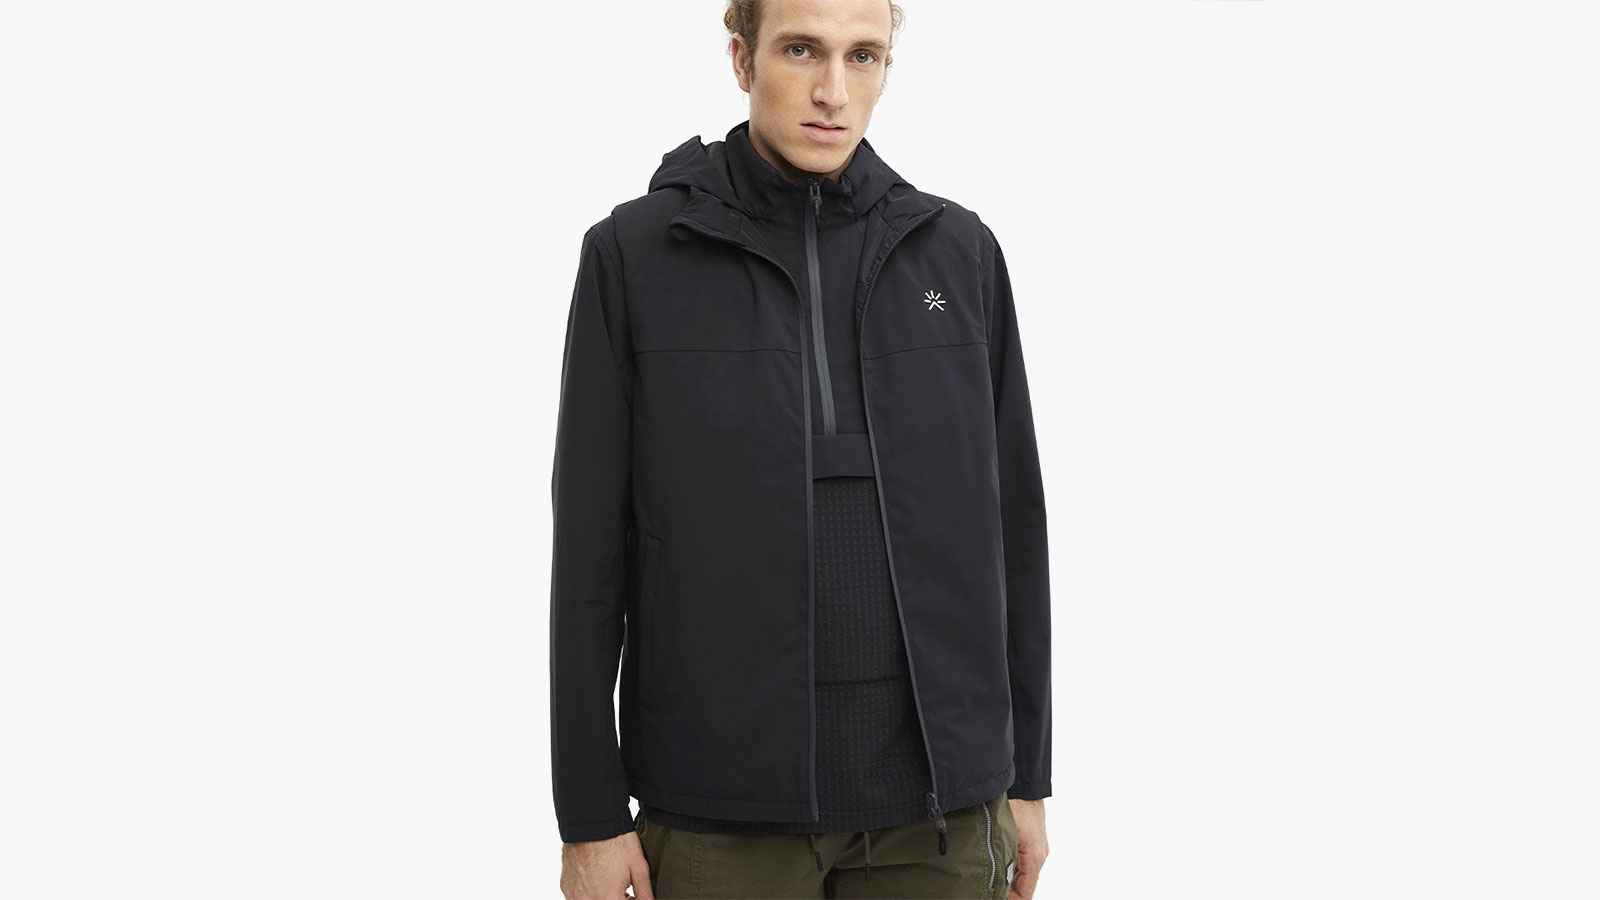 Tropicfeel NS40 The All-Possible Travel Jacket